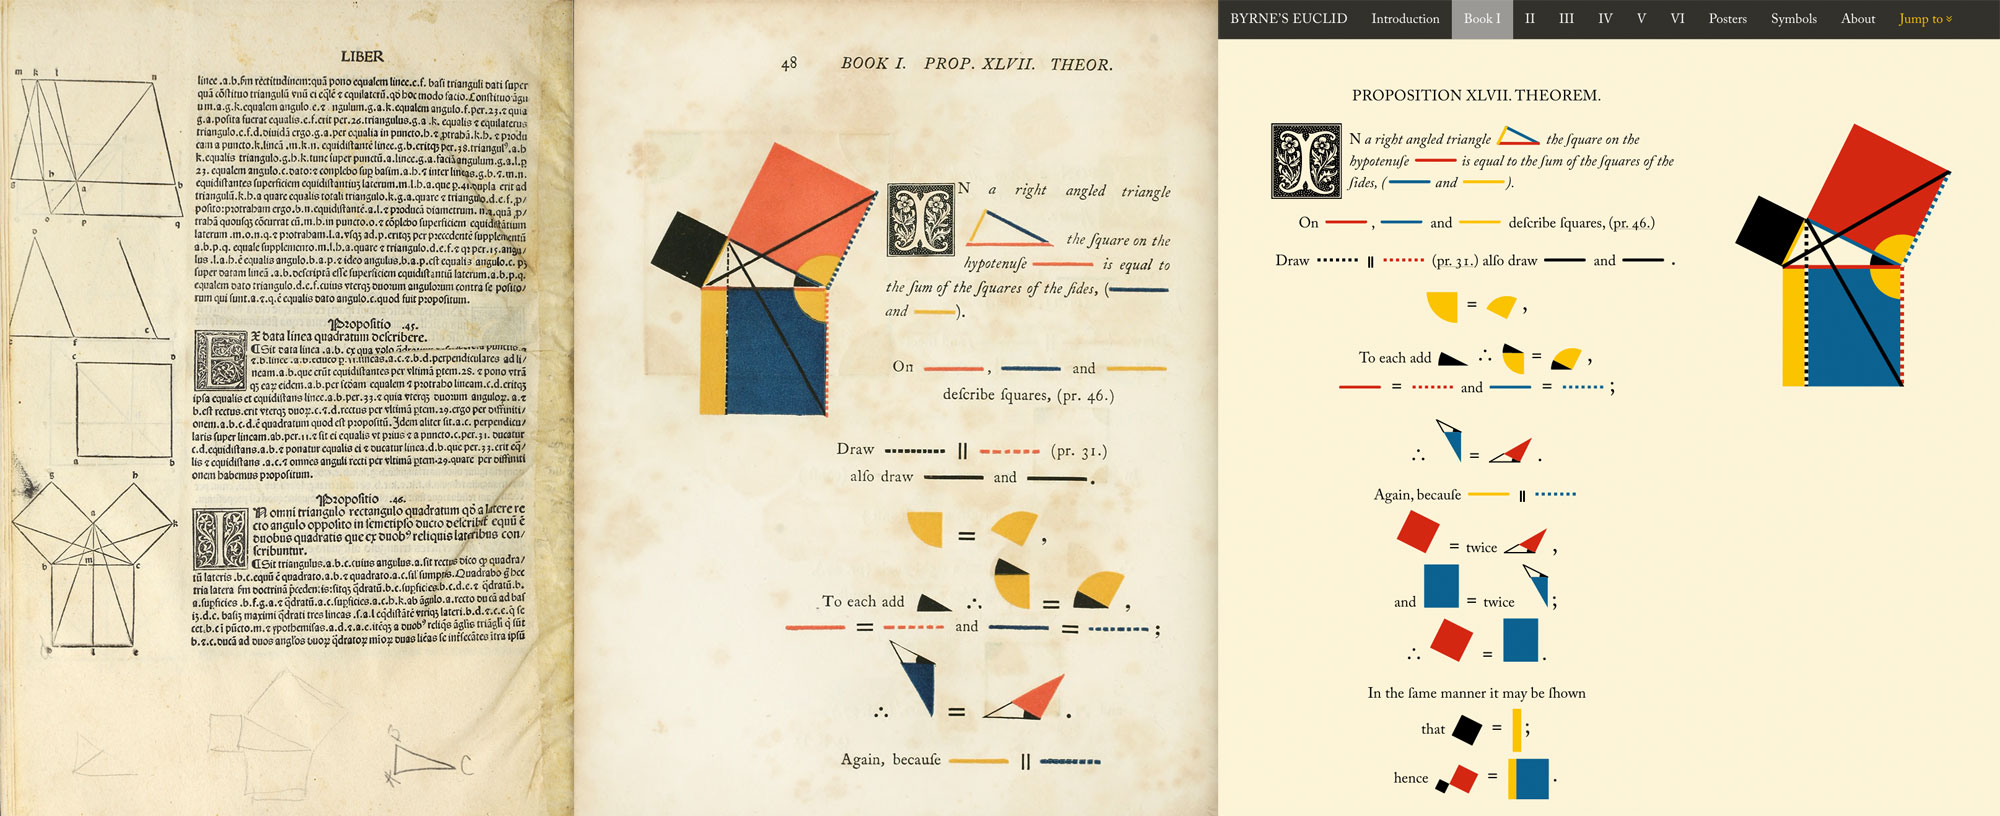 Comparison between first printed edition, Byrne's version, and the new web version